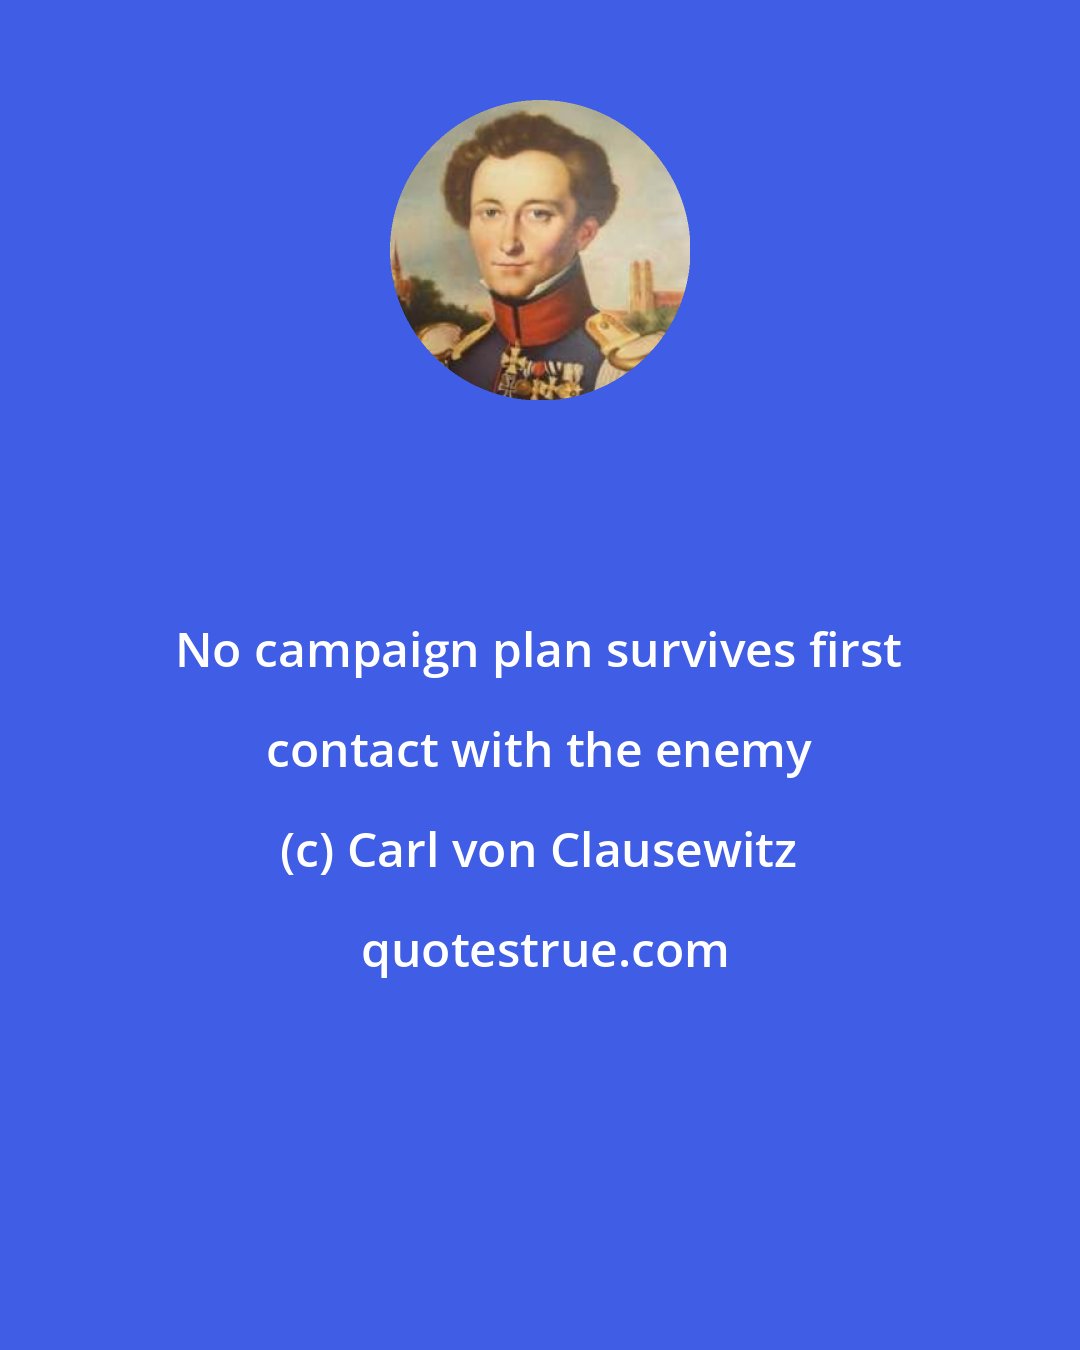 Carl von Clausewitz: No campaign plan survives first contact with the enemy